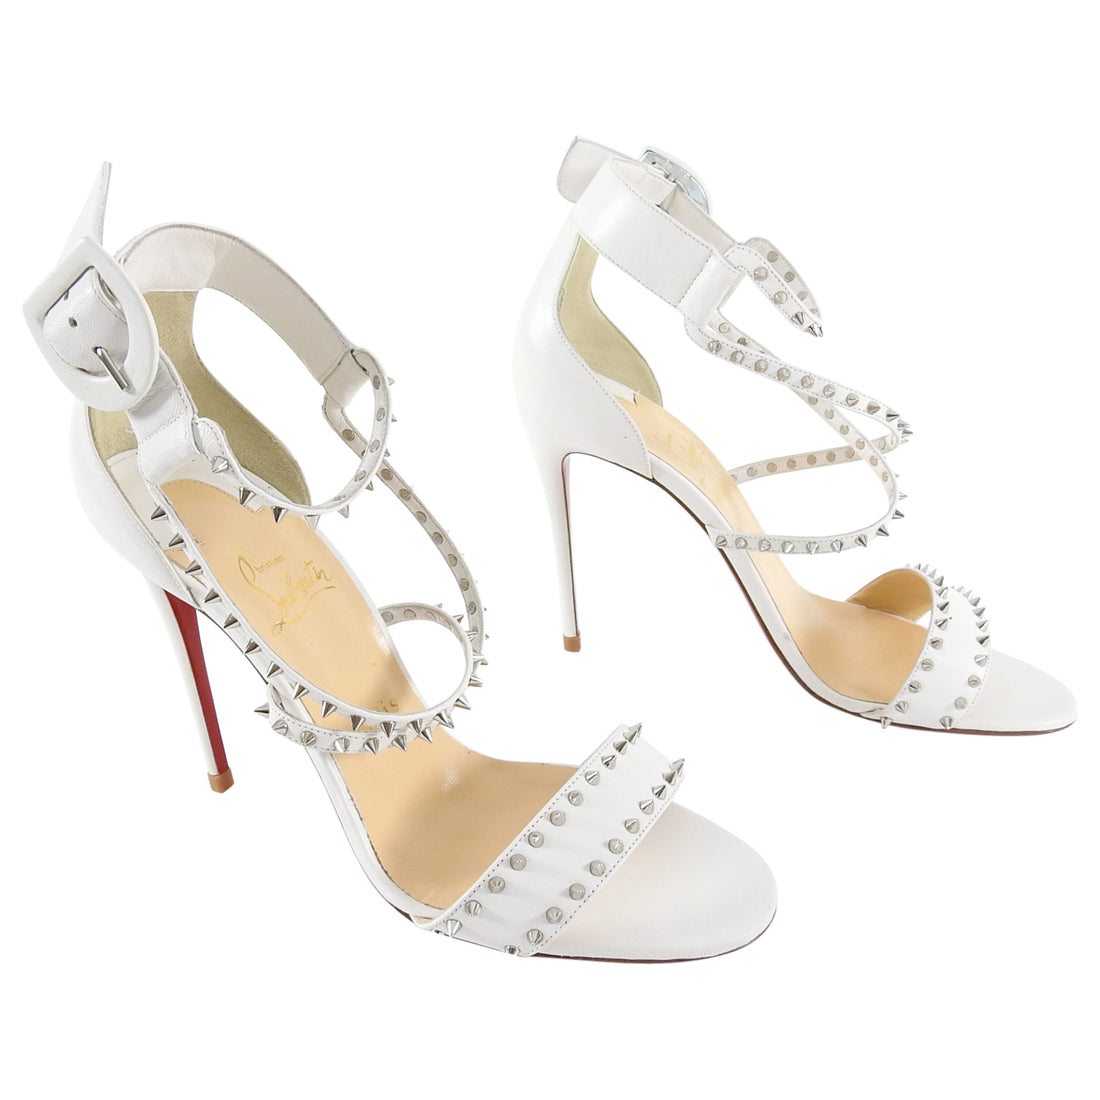 louboutin white spiked heels